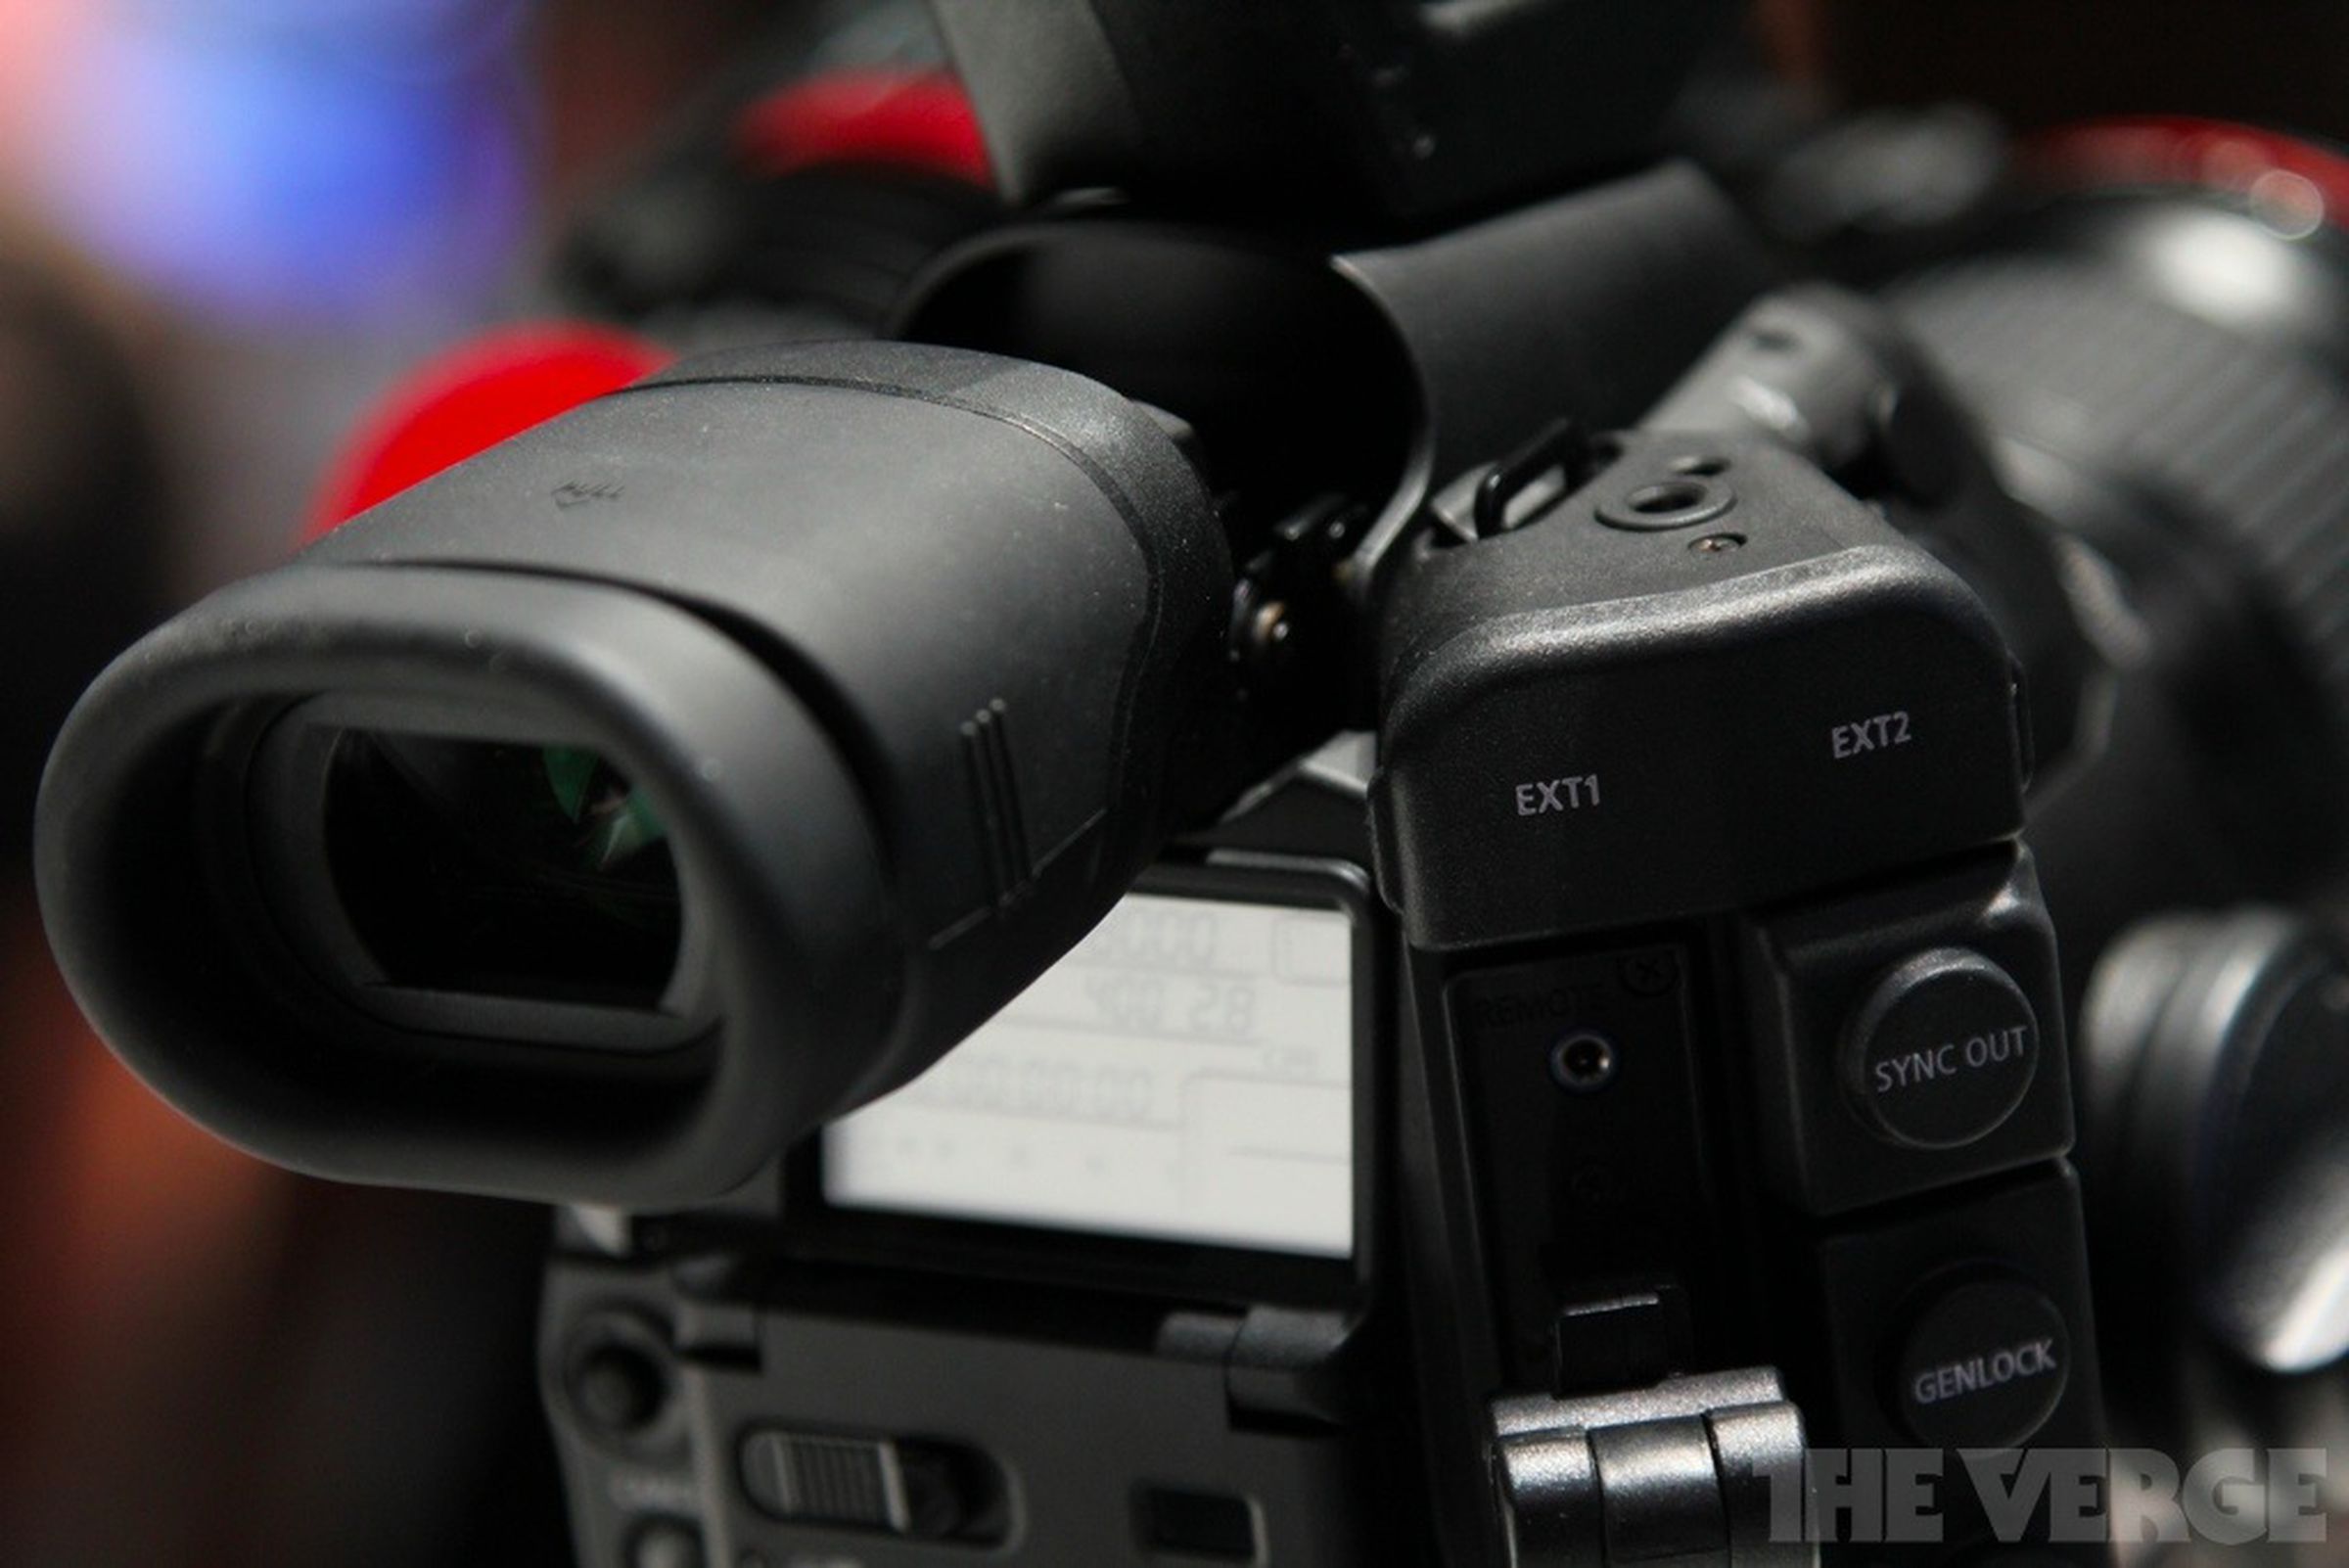 Canon Cinema EOS C300 hands-on pictures